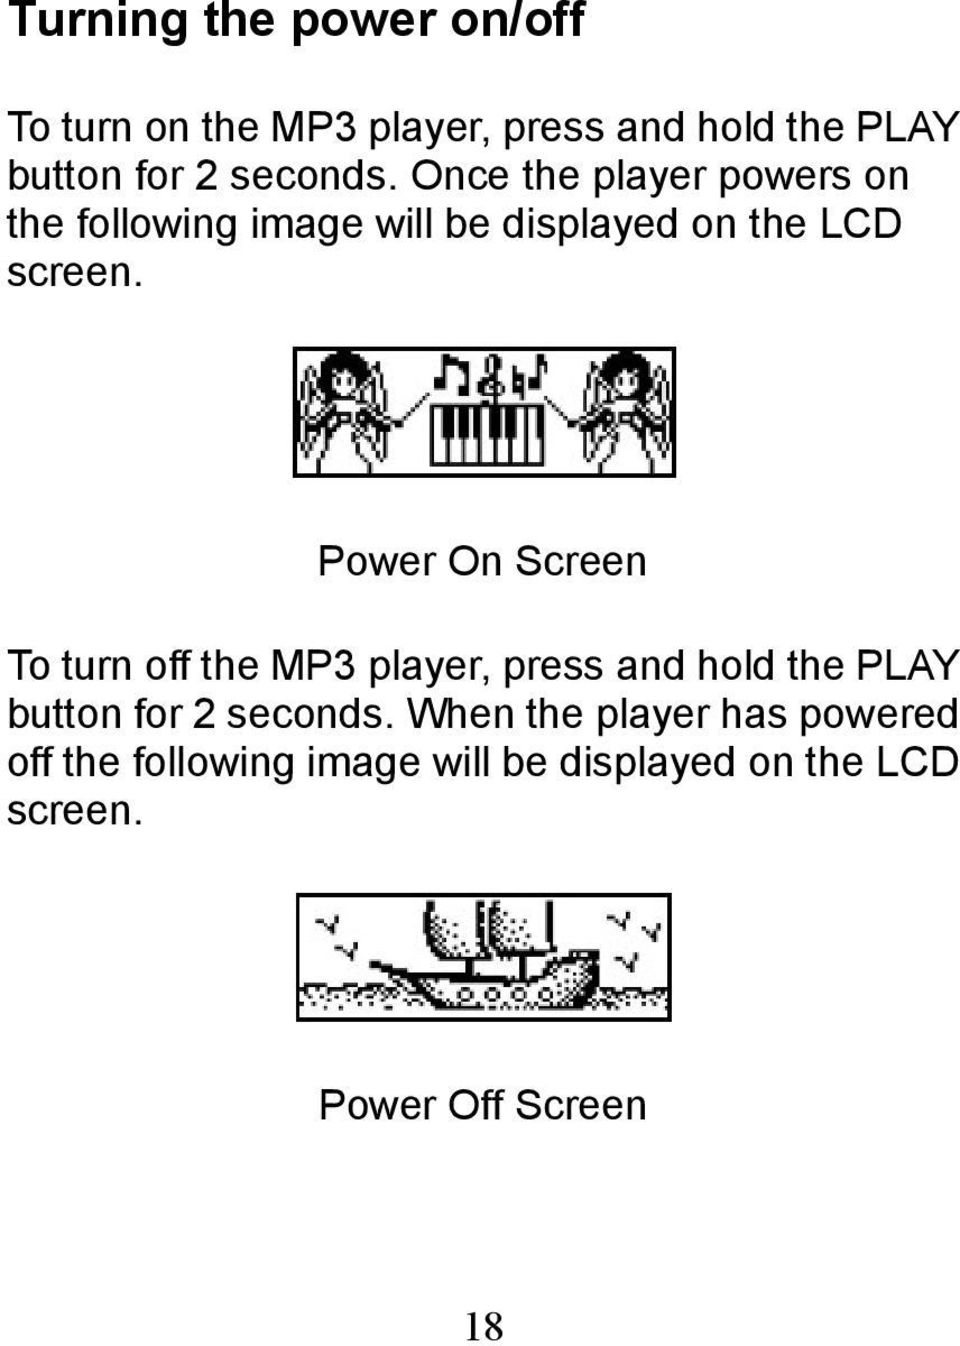 Power On Screen To turn off the MP3 player, press and hold the PLAY button for 2 seconds.